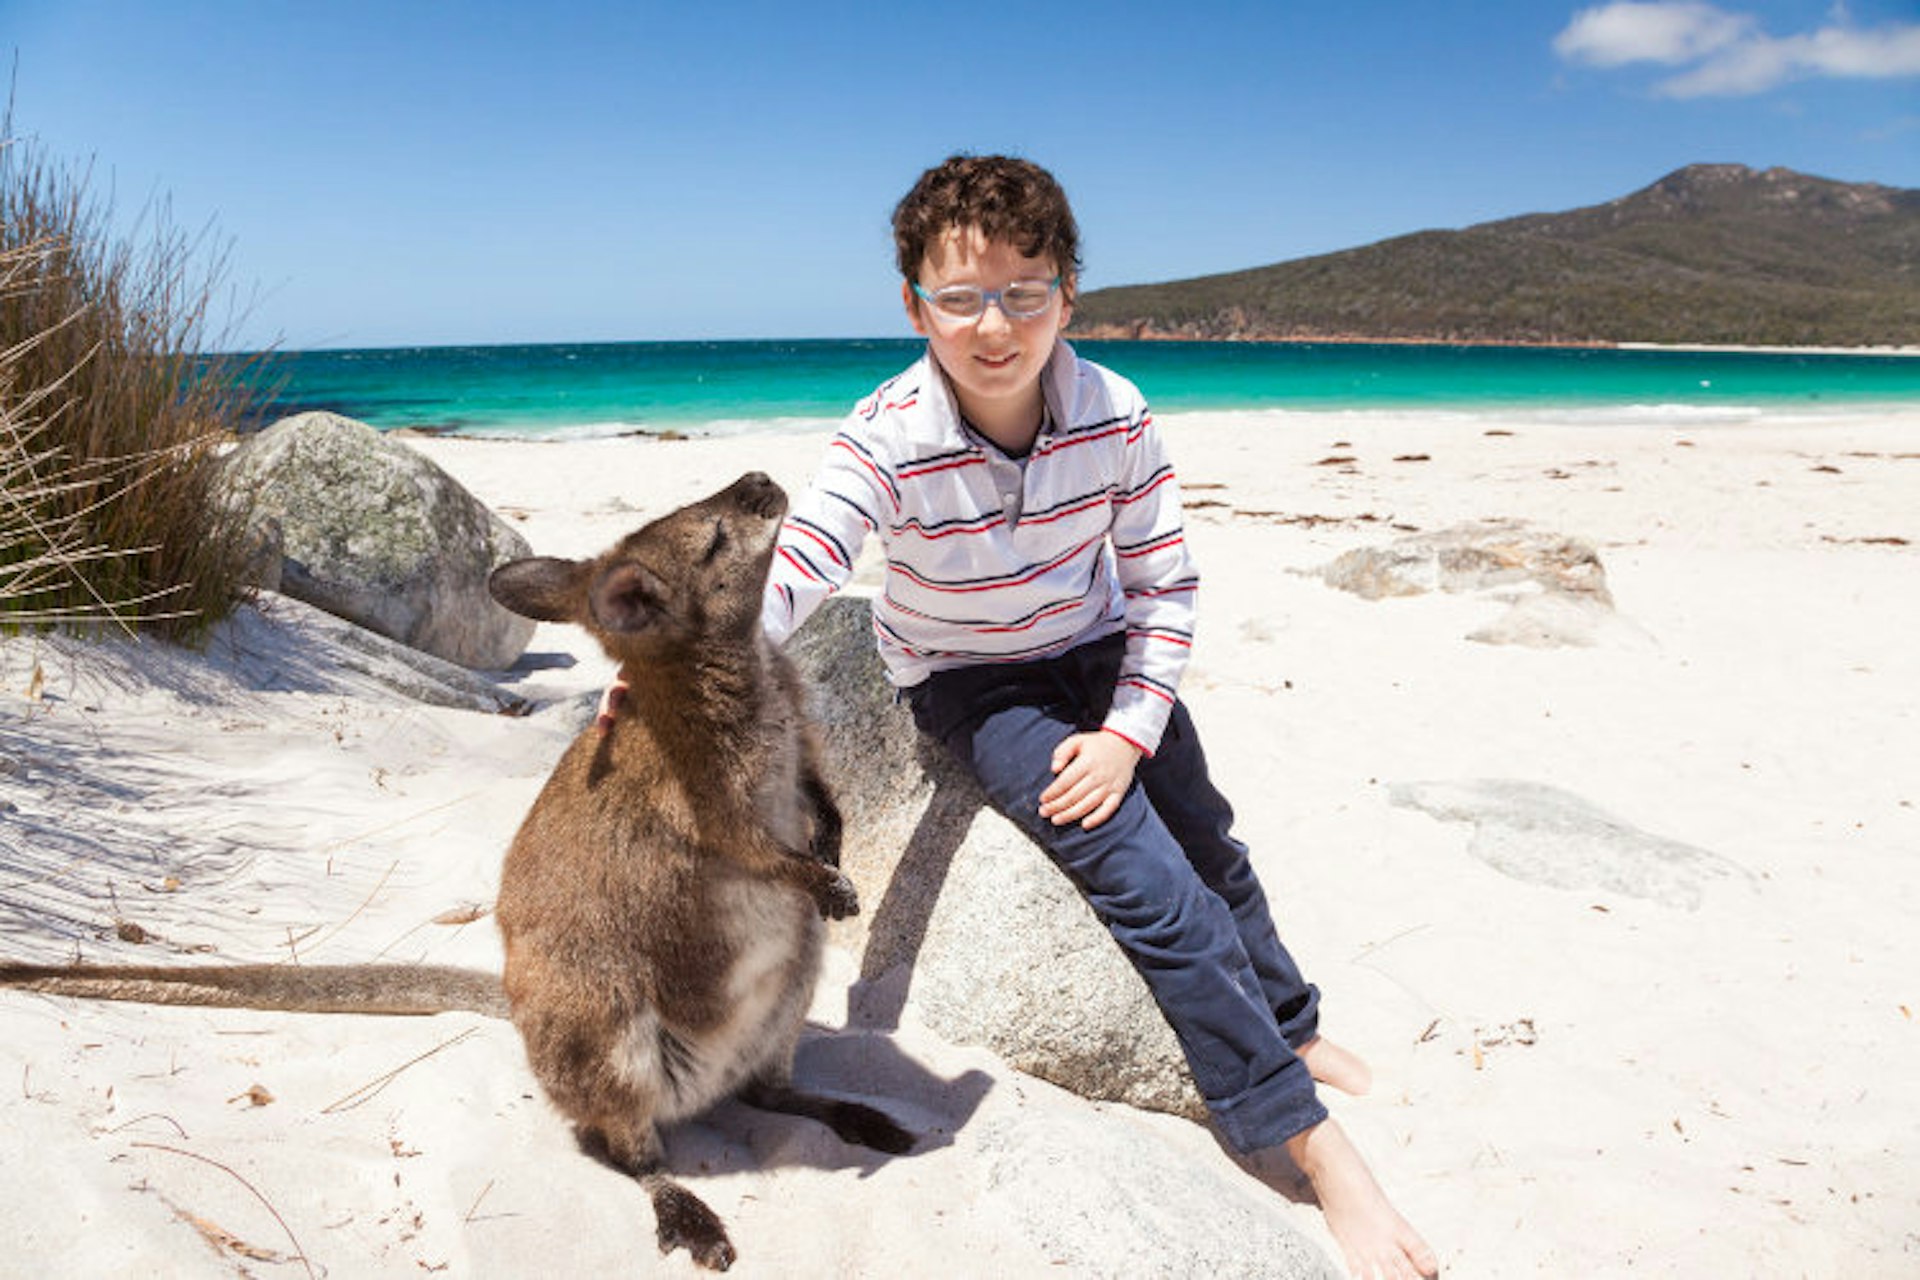 Getting friendly with a wallaby in Tasmania’s Freycinet National Park. Image by Matteo Colombo / Getty Images